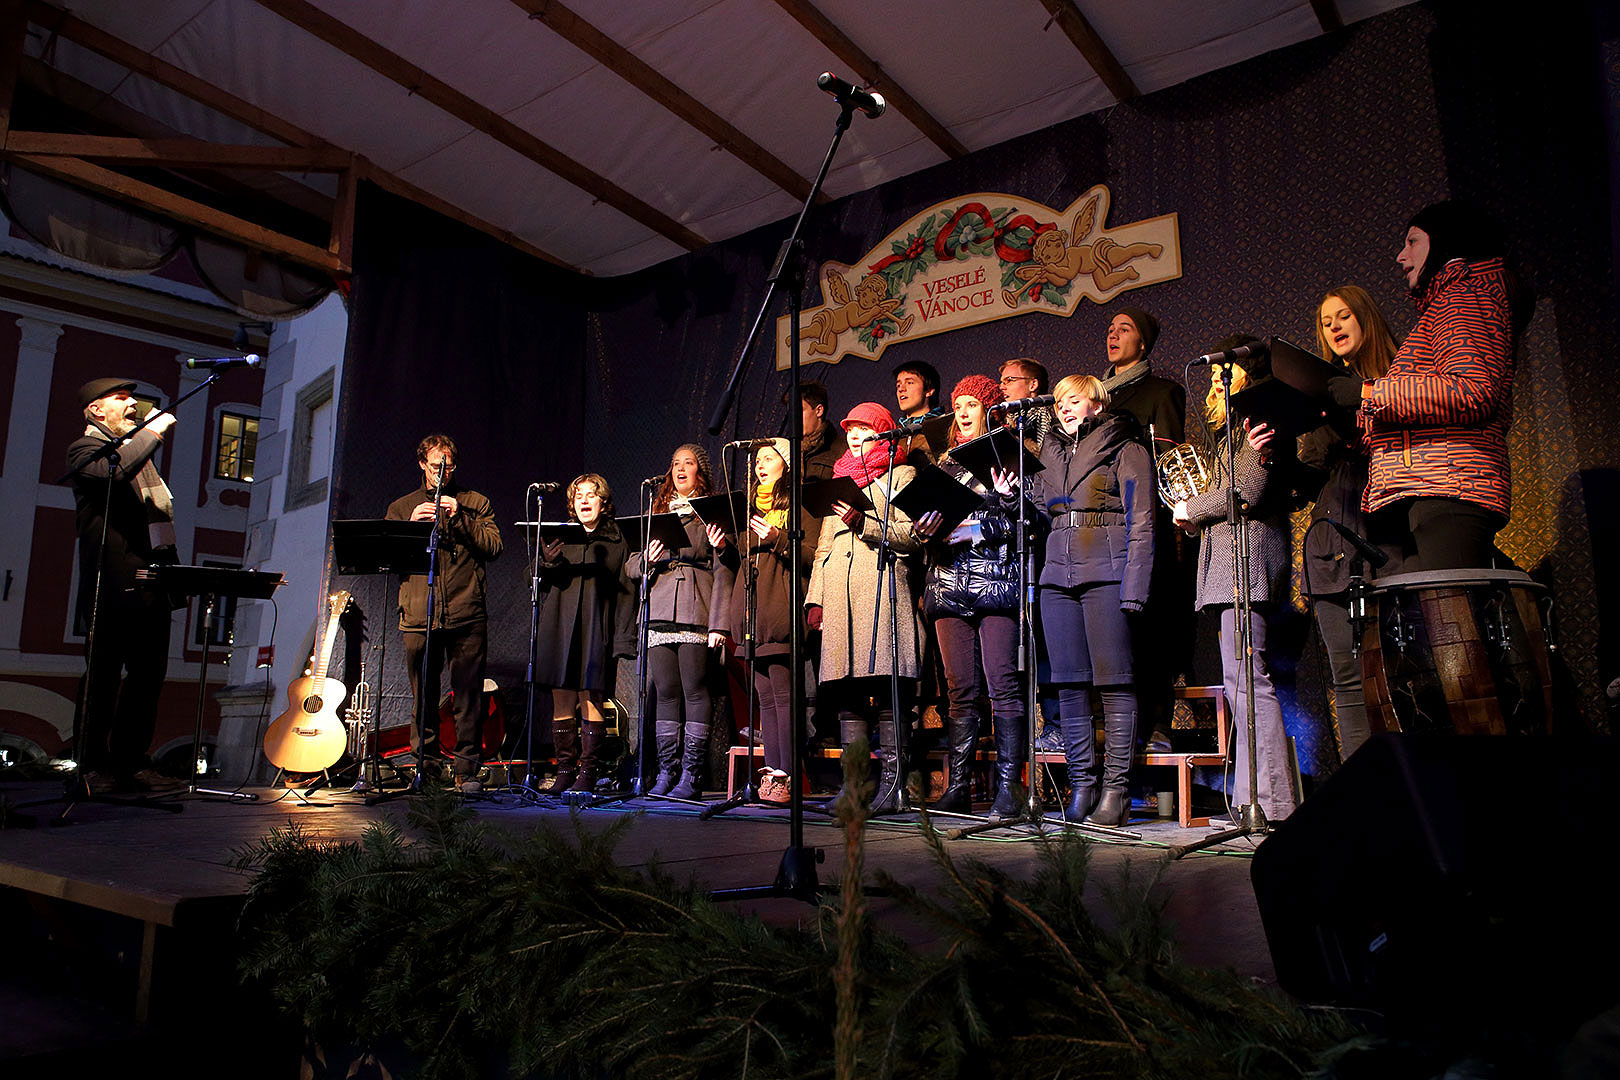 1st Advent Sunday - Musical and Poetical Opening of Advent and Lighting of the Christmas Tree, 1.12.2013